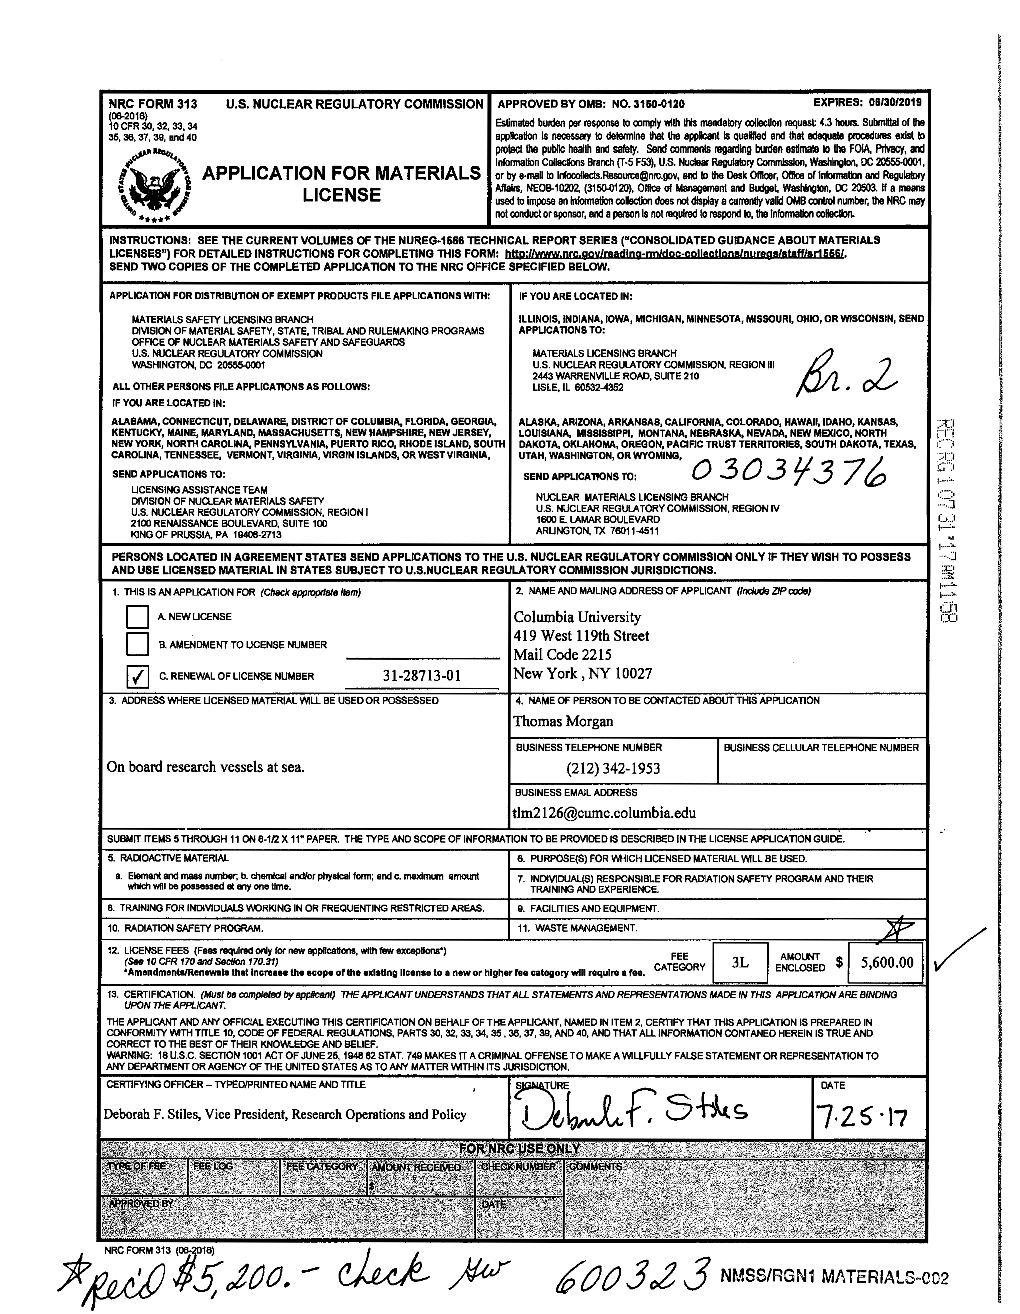 Columbia University, Renewal Request, NRC Form 313 Dated 07